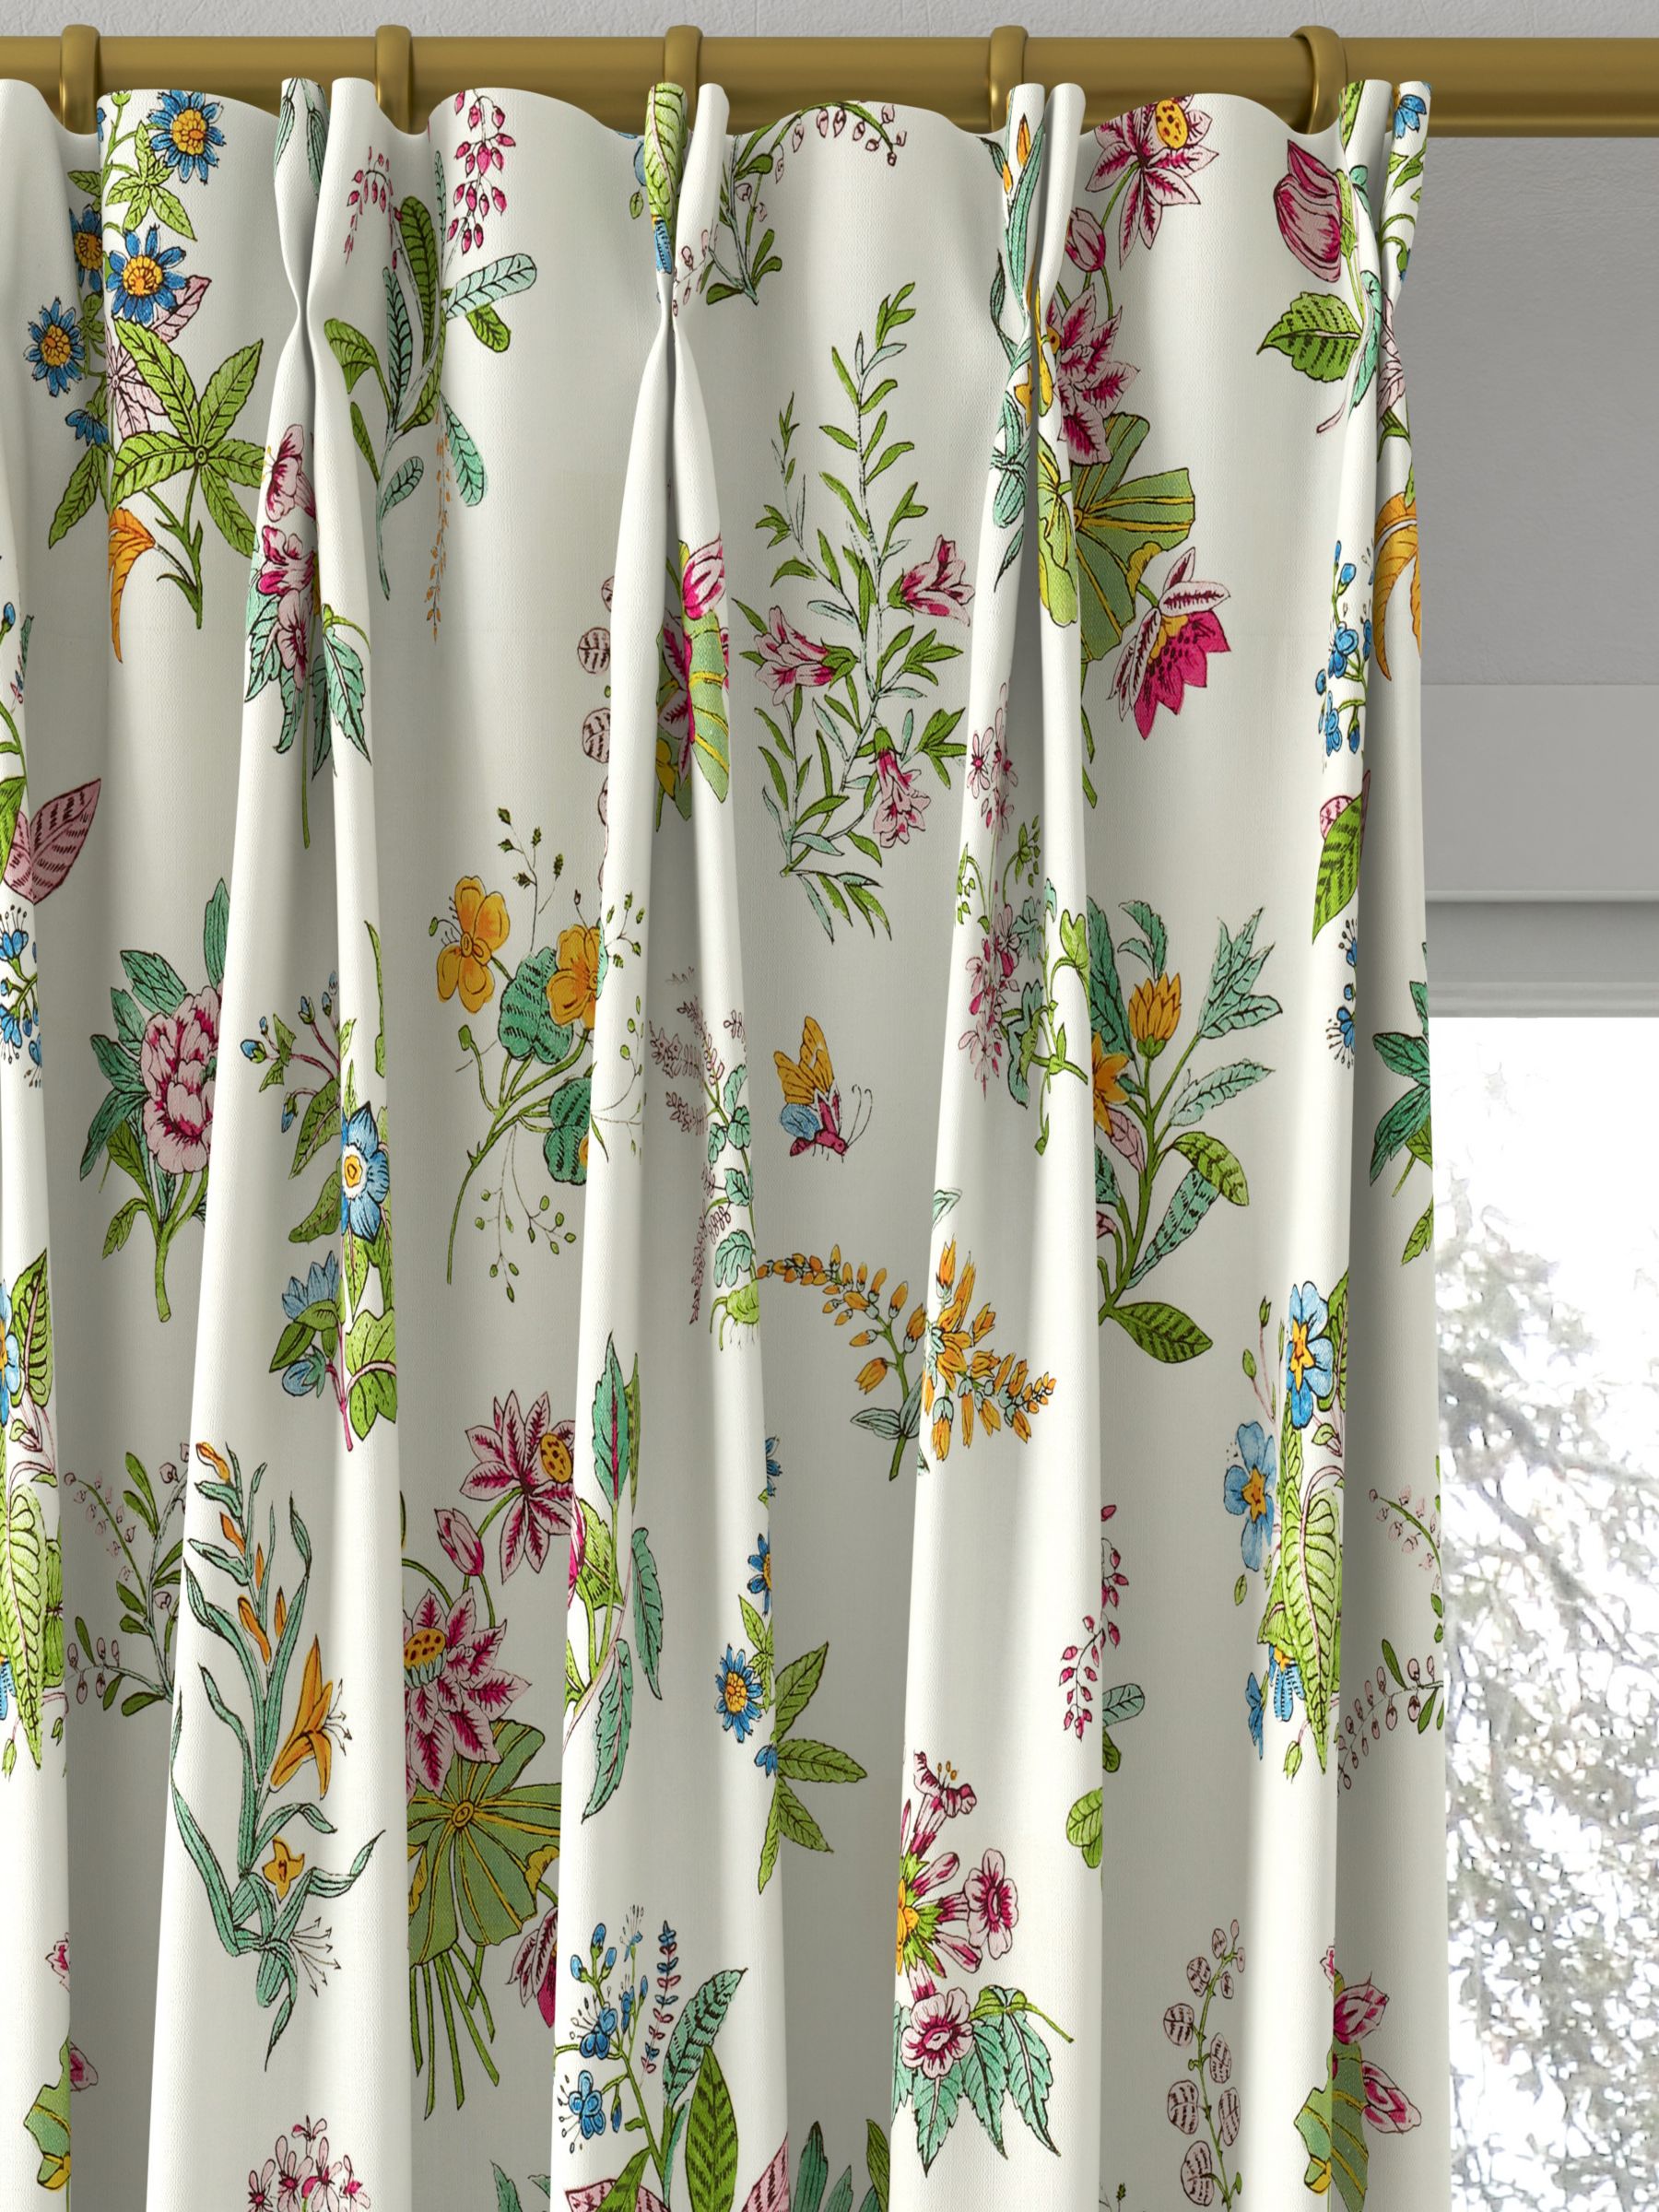 Harlequin x Sophie Robinson Woodland Floral Made to Measure Curtains, Peridot/Ruby/Pearl